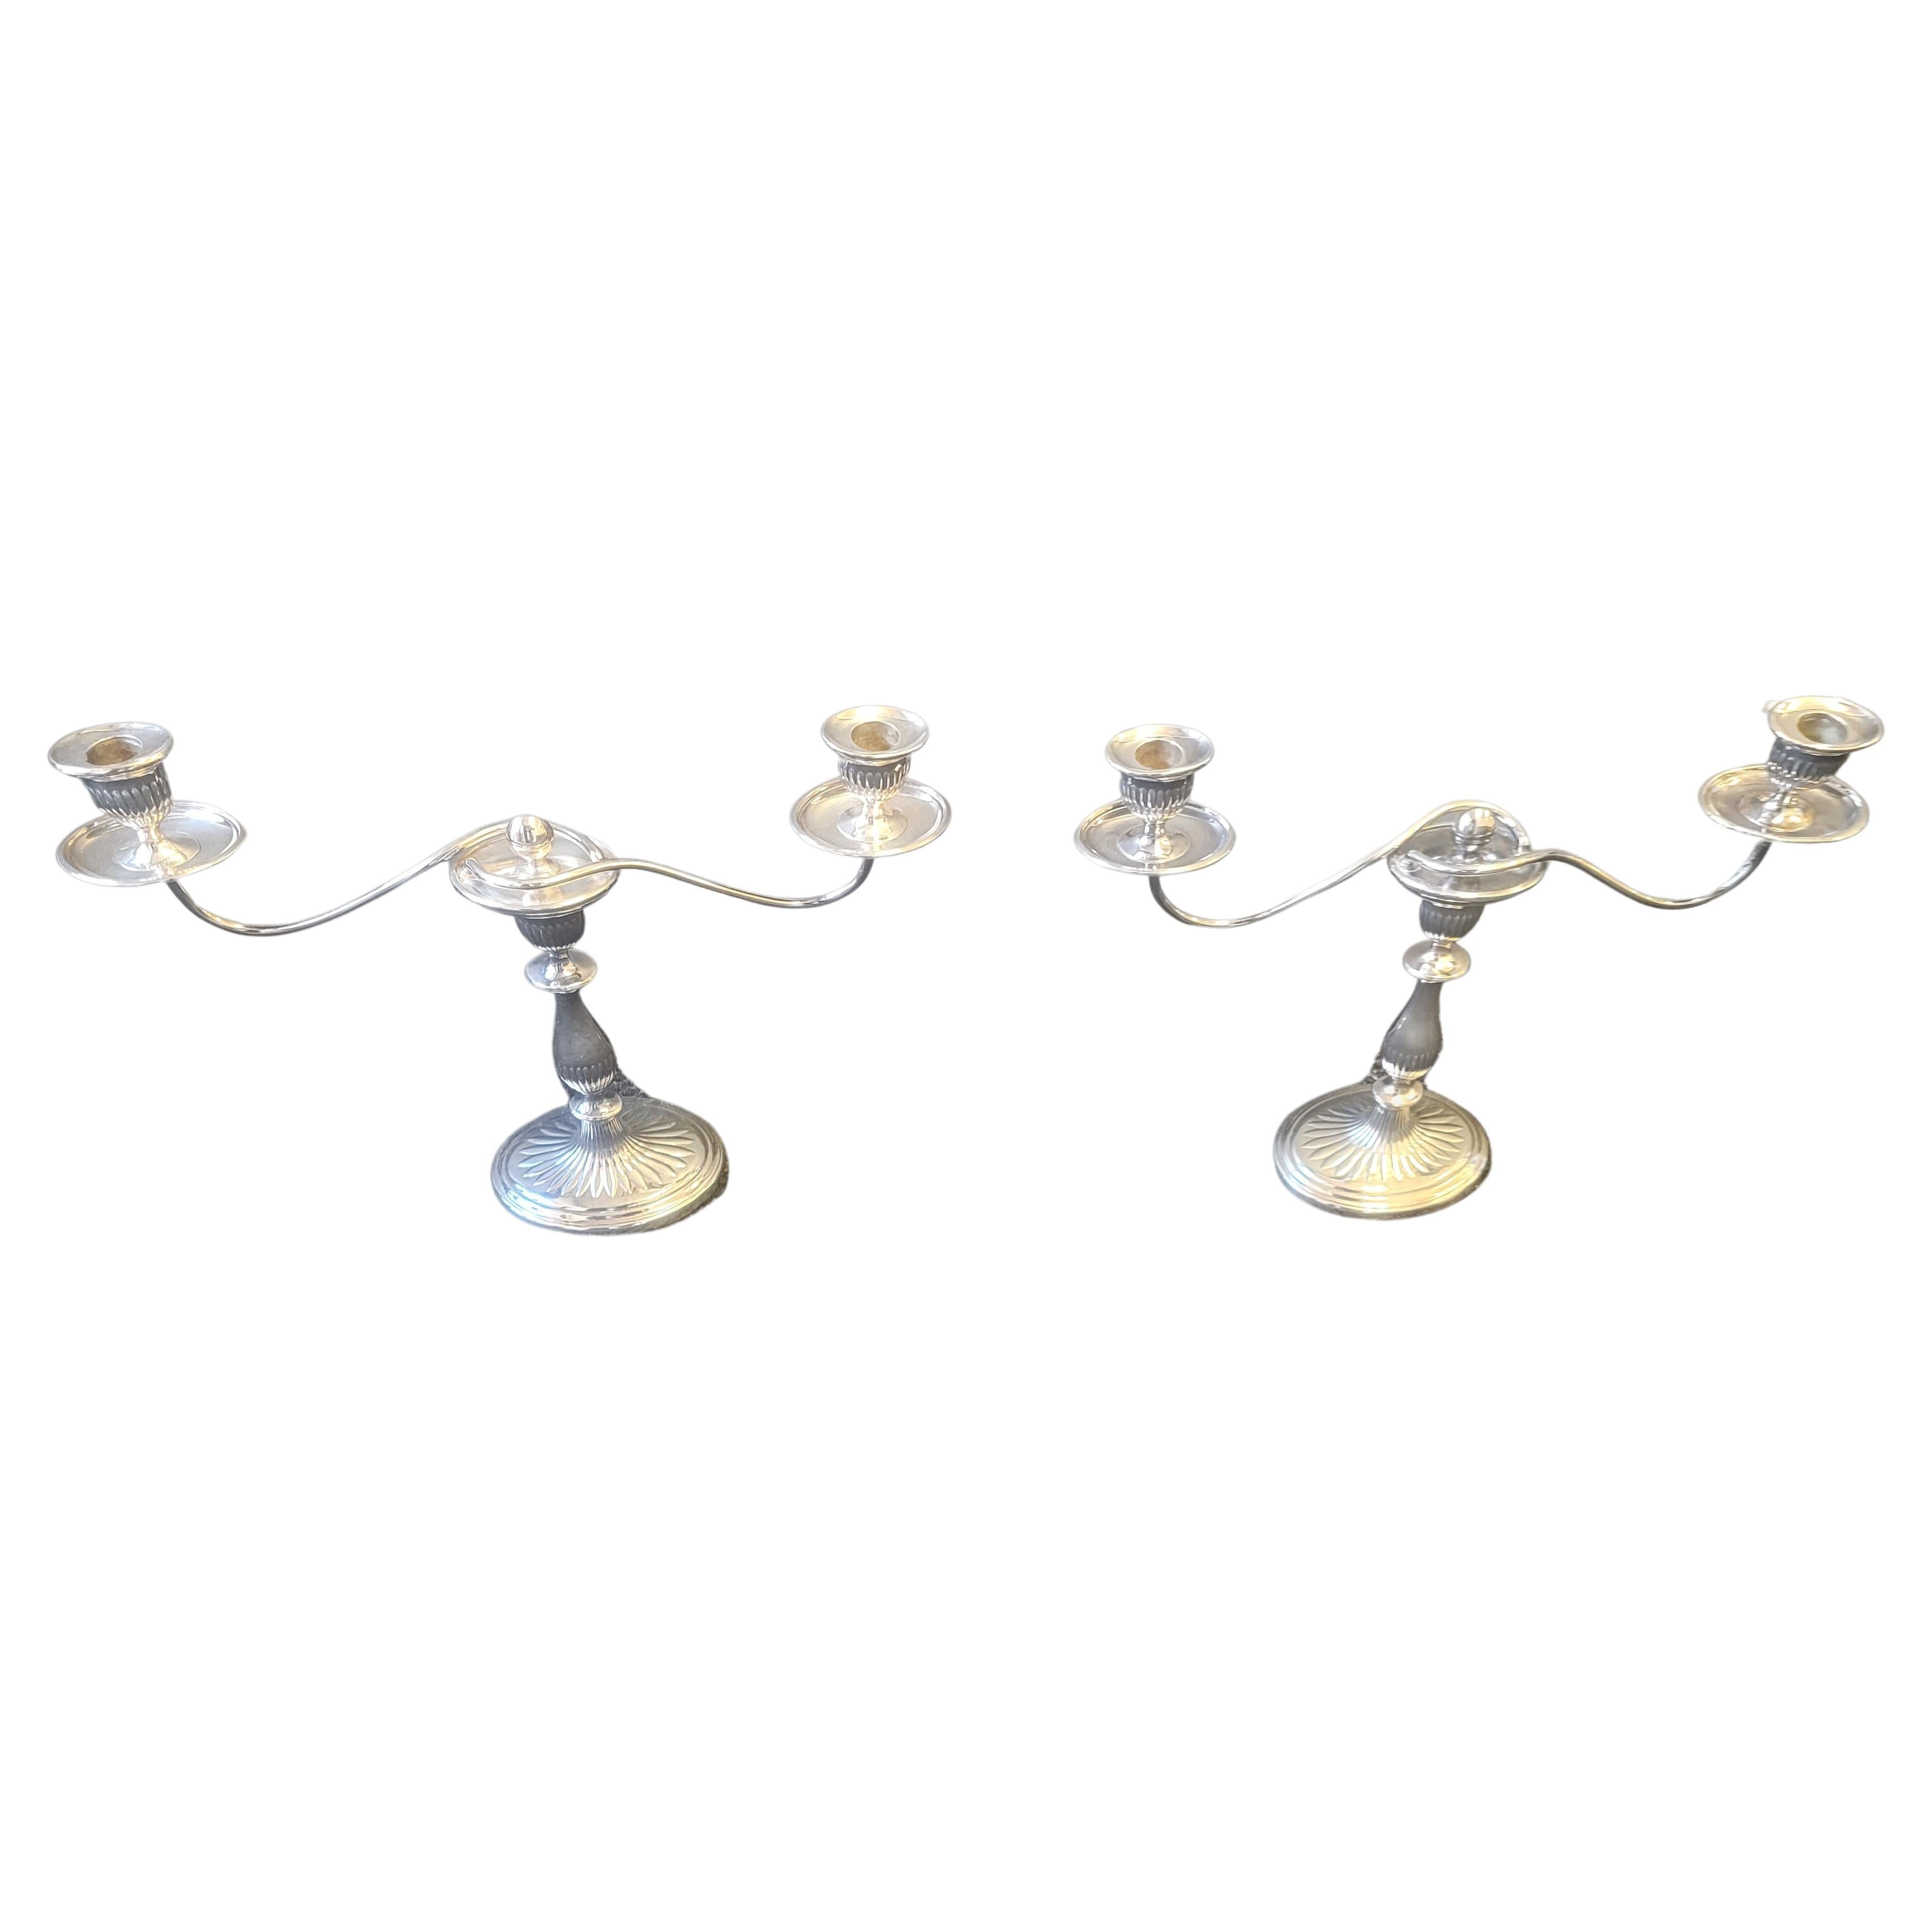 Pair Regency style English silverplate convertible one-to-three light candelabras in good vintage condition.
Measure 17.5 inches in width and stands 14 inches tall. Oval base is 6